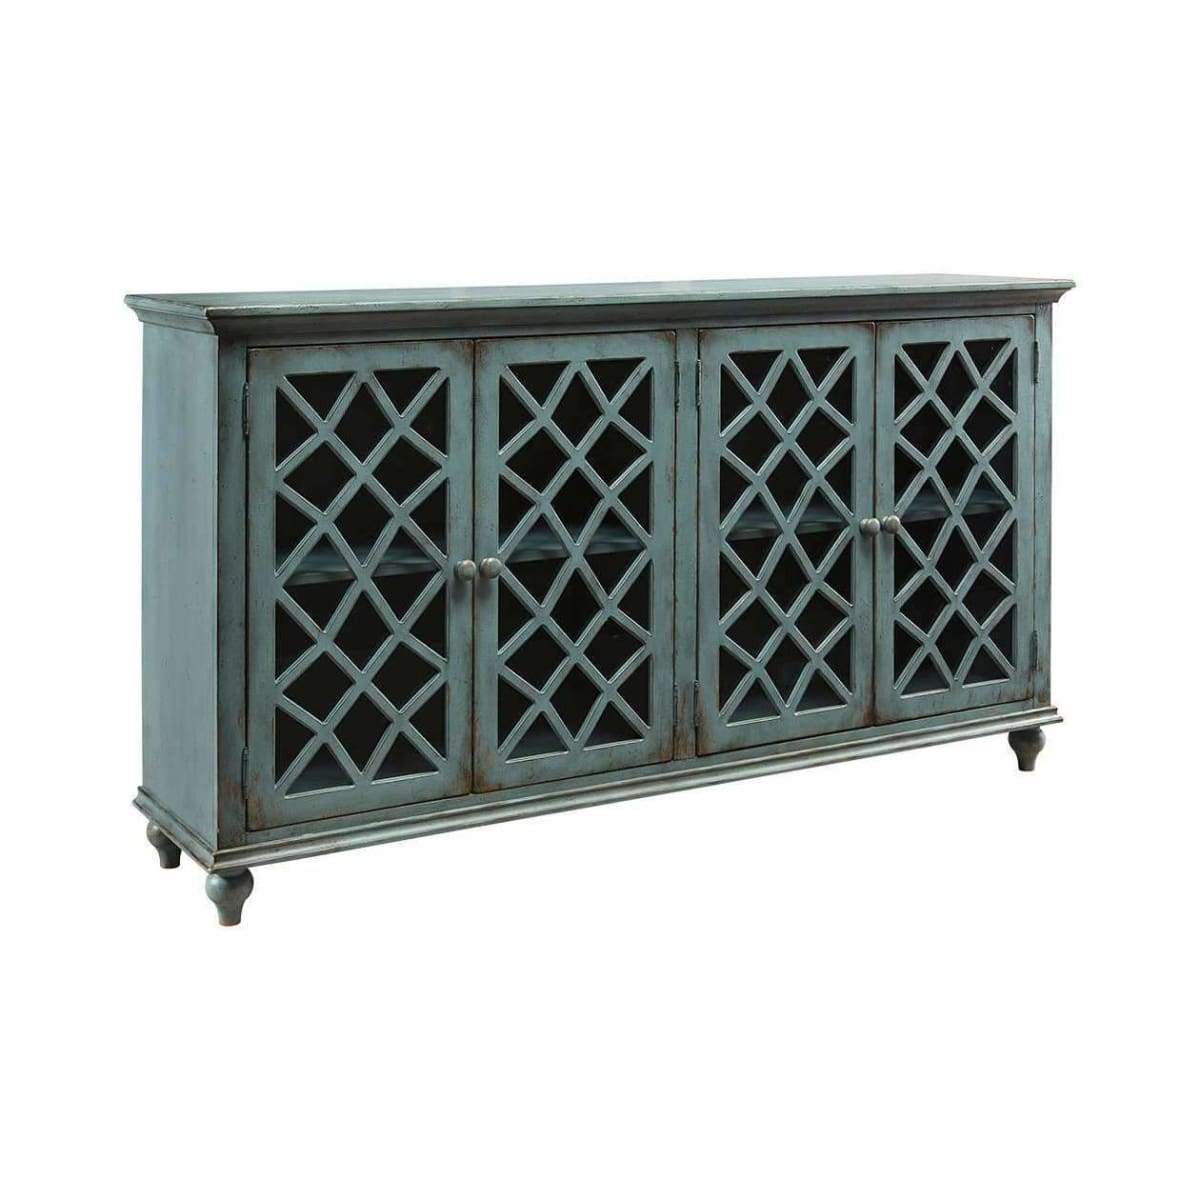 Mirimyn Teal Accent Cabinet - accent cabinet